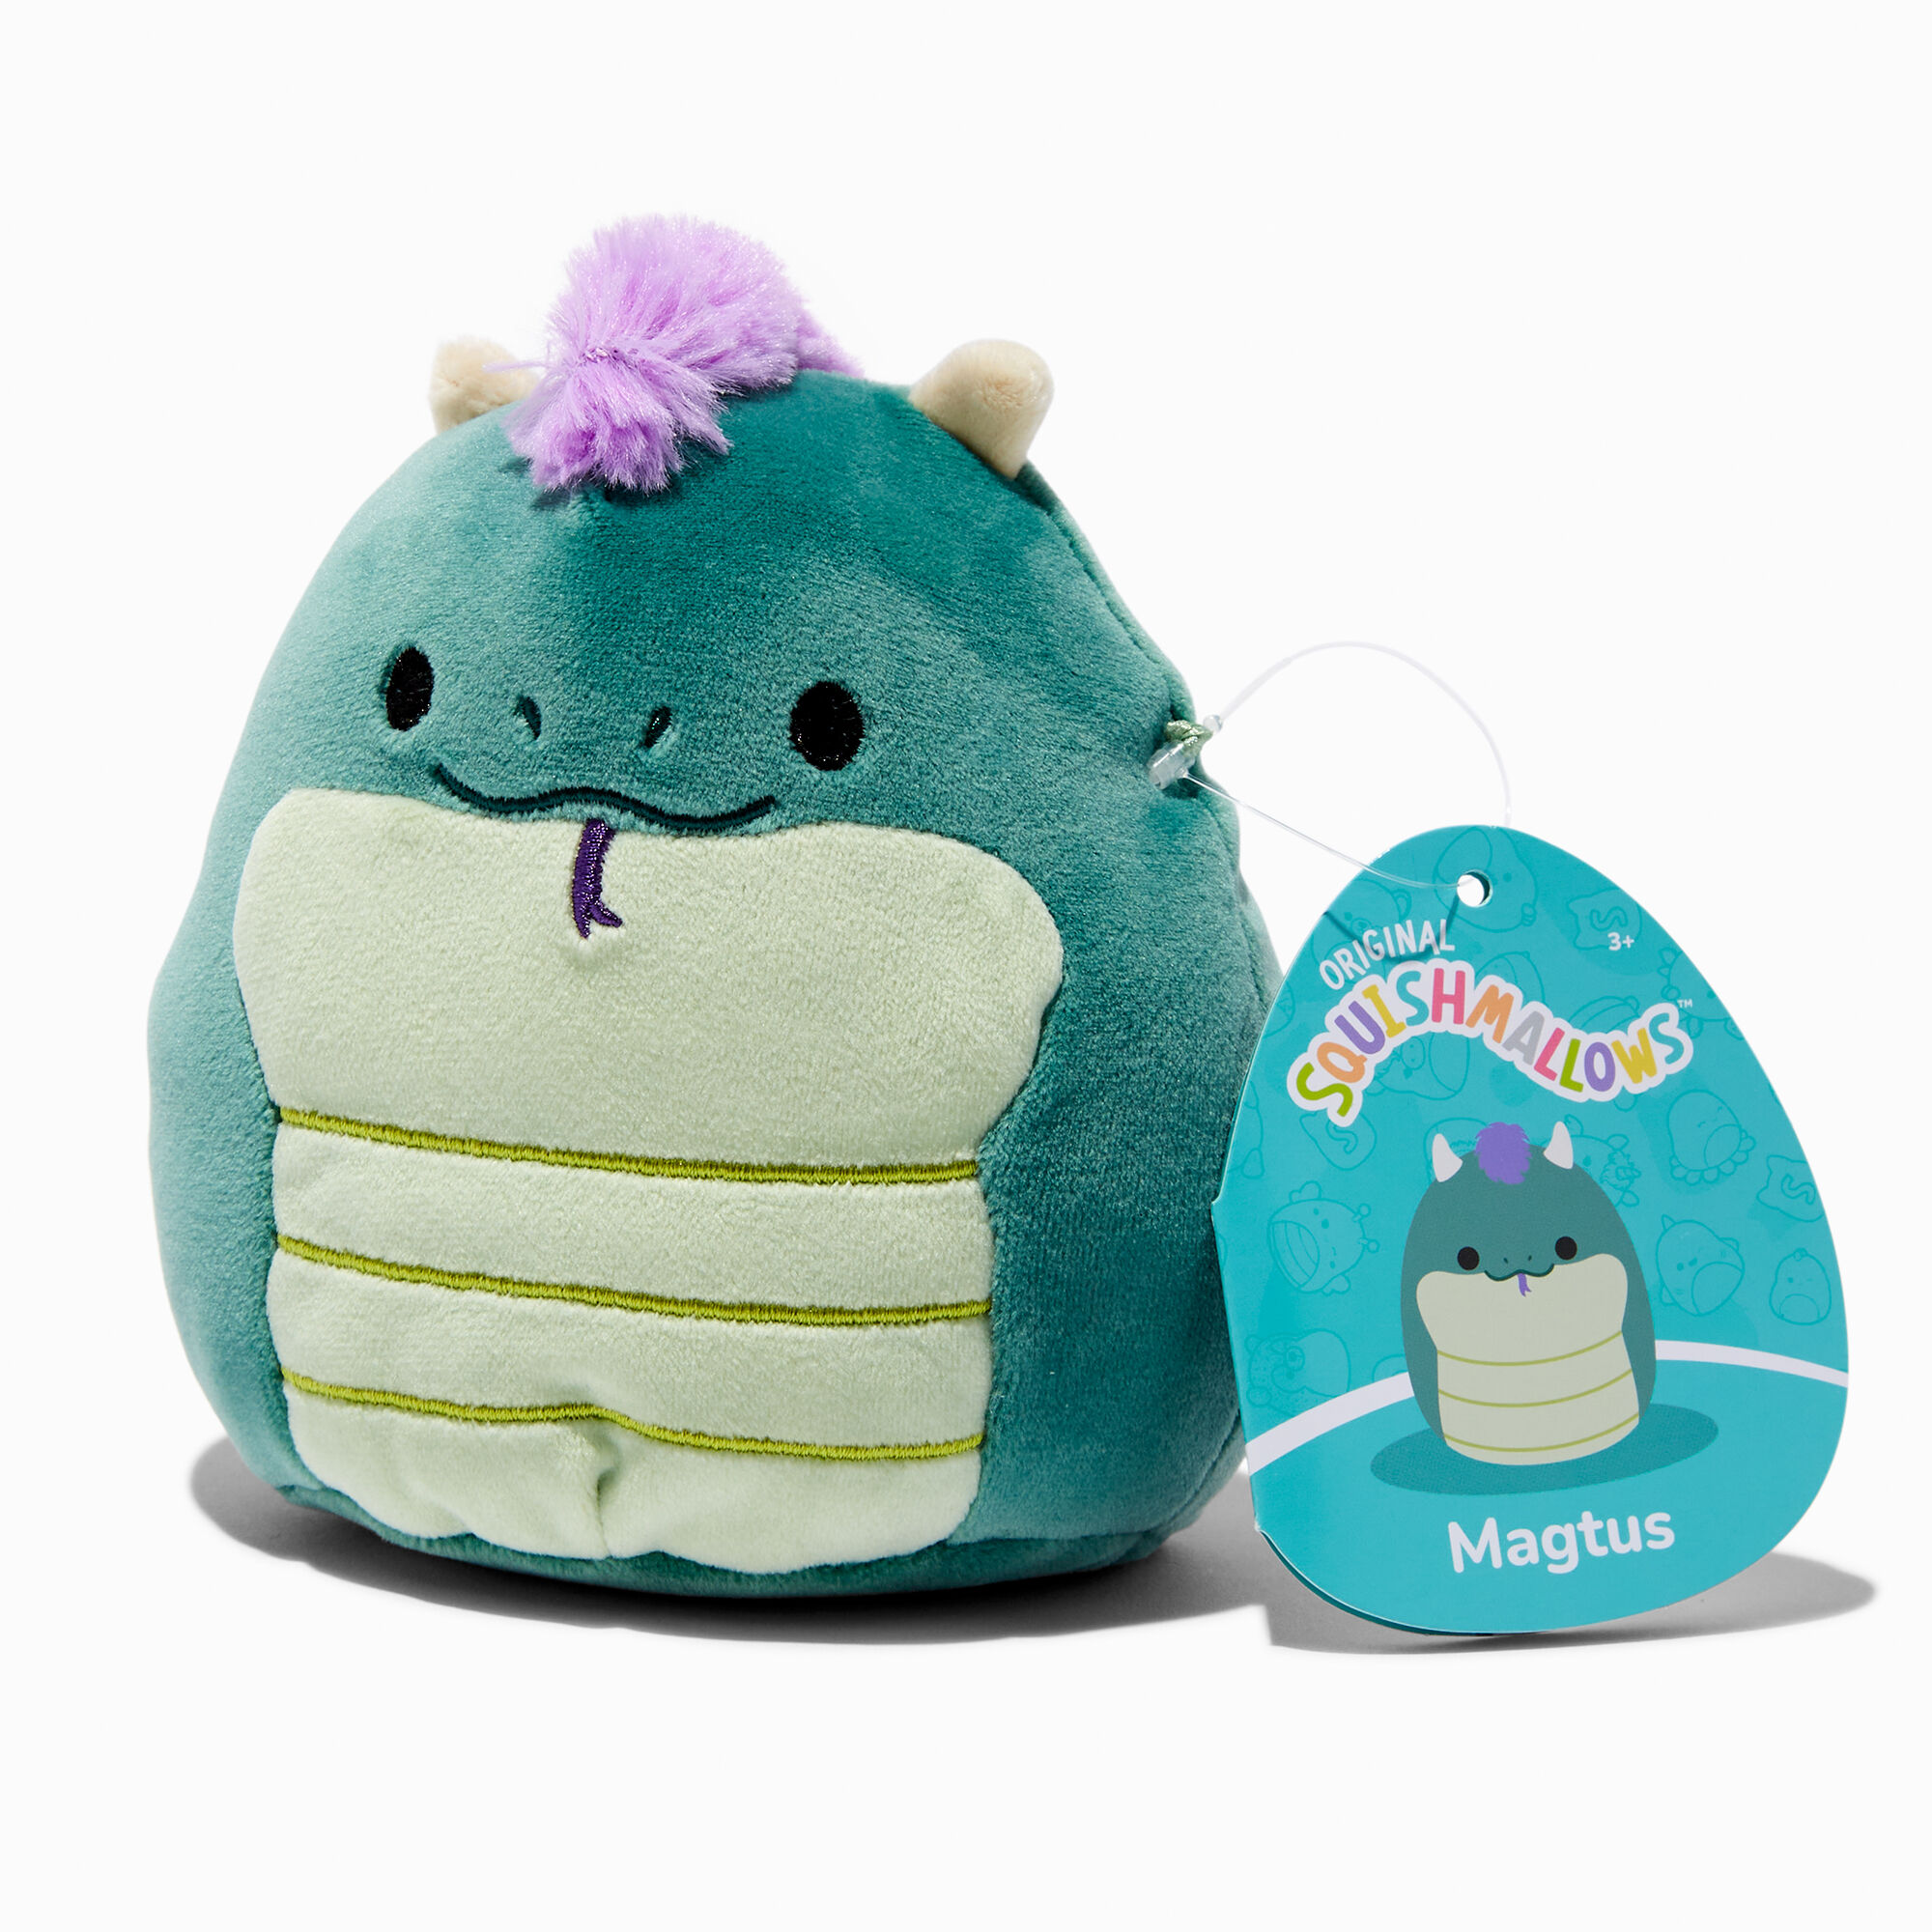 View Claires Squishmallows 5 Magtus Soft Toy information